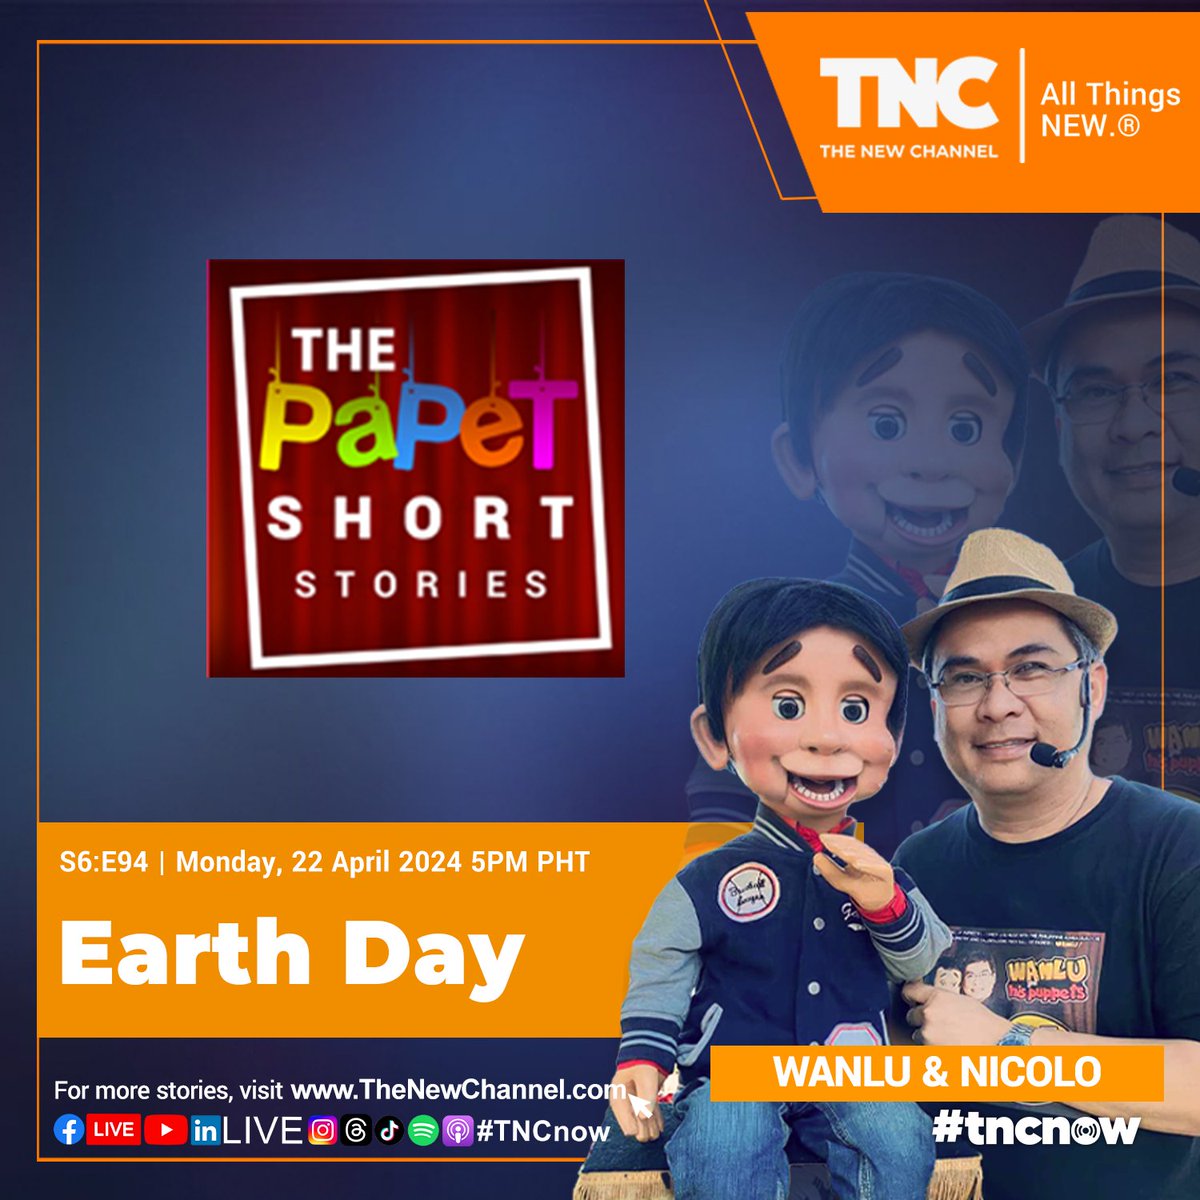 Watch S6:E94 | Earth Day | The Papet Short Stories with Tito Wanlu and Nicolo

YouTube - bit.ly/ThePapetShortS…

#onTNC #TNCnow #ThePapetShortStoriesOnTNC #TitoWanlu #WanluLunaria #Nicolo #EarthDay #Puppeteer #FYP #ForYouPage #WatchTNCNow #TNCTheNewChannel #AllThingsNEW